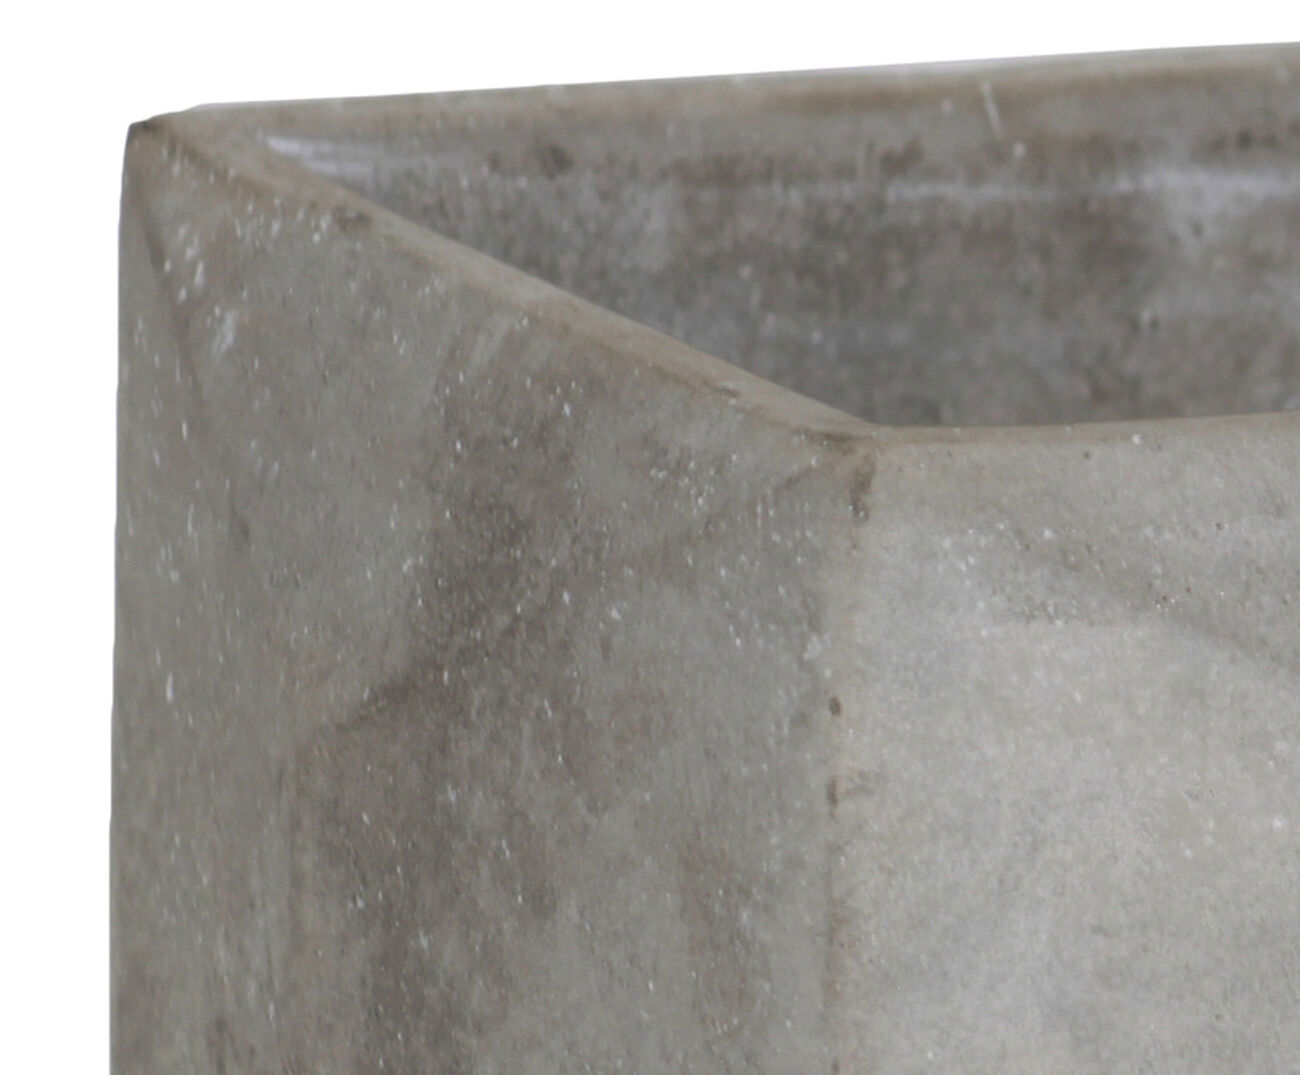 Cement Flower Pot with Square Base and Square Top, Gray